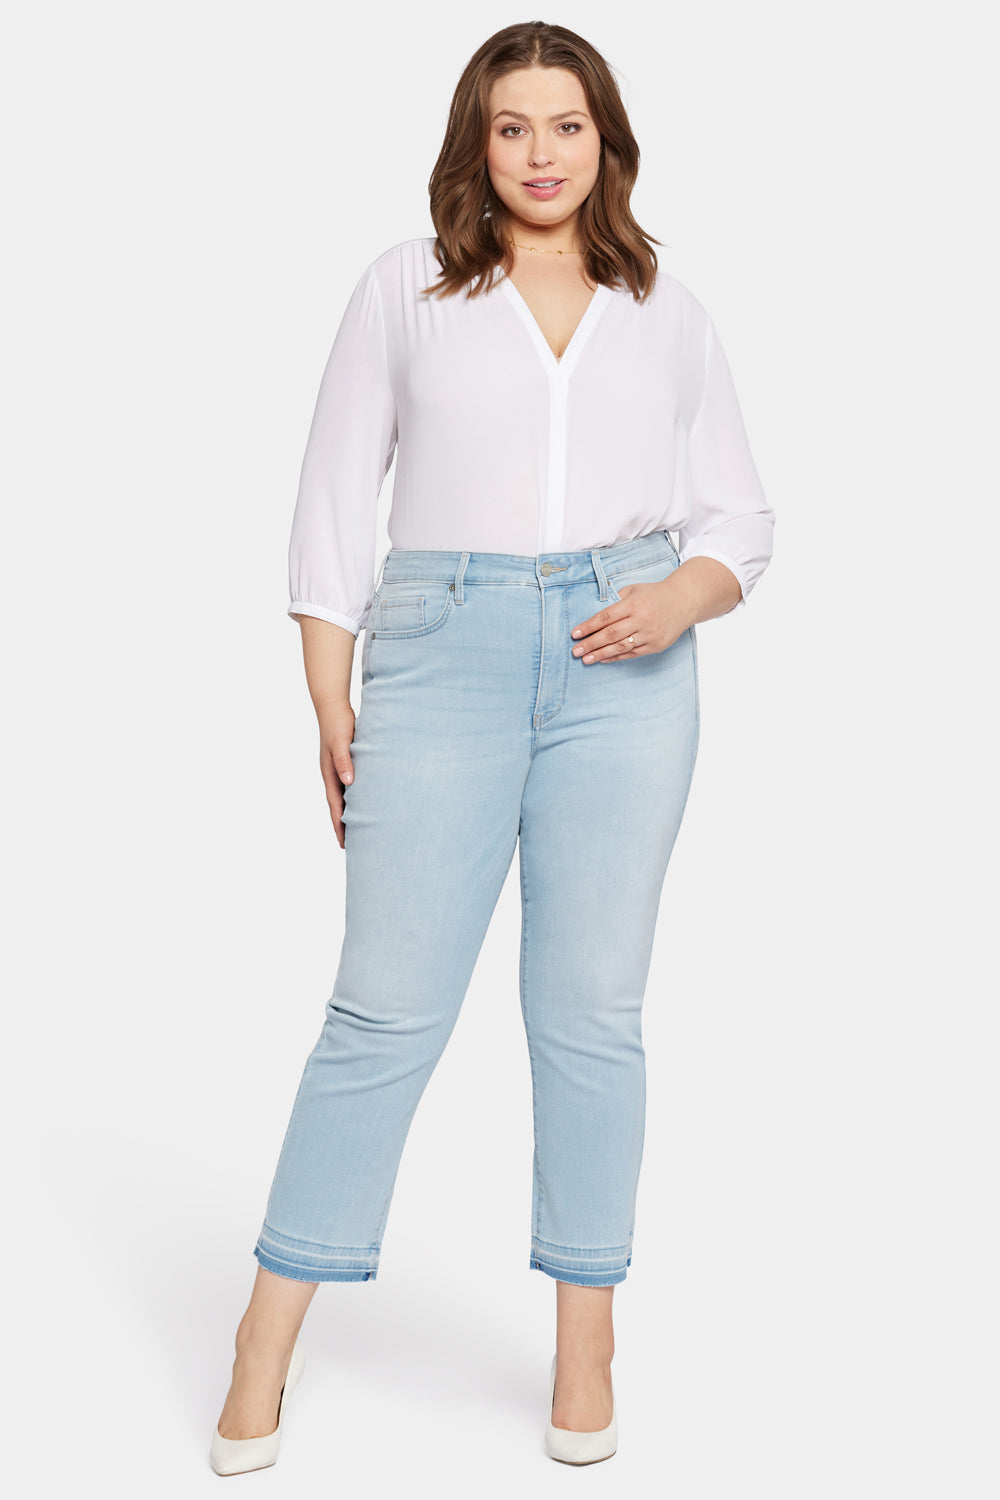 NYDJ Marilyn Straight Ankle Jeans In Petite Plus Size In Cool Embrace® Denim With High Rise And Released Hems - Brightside